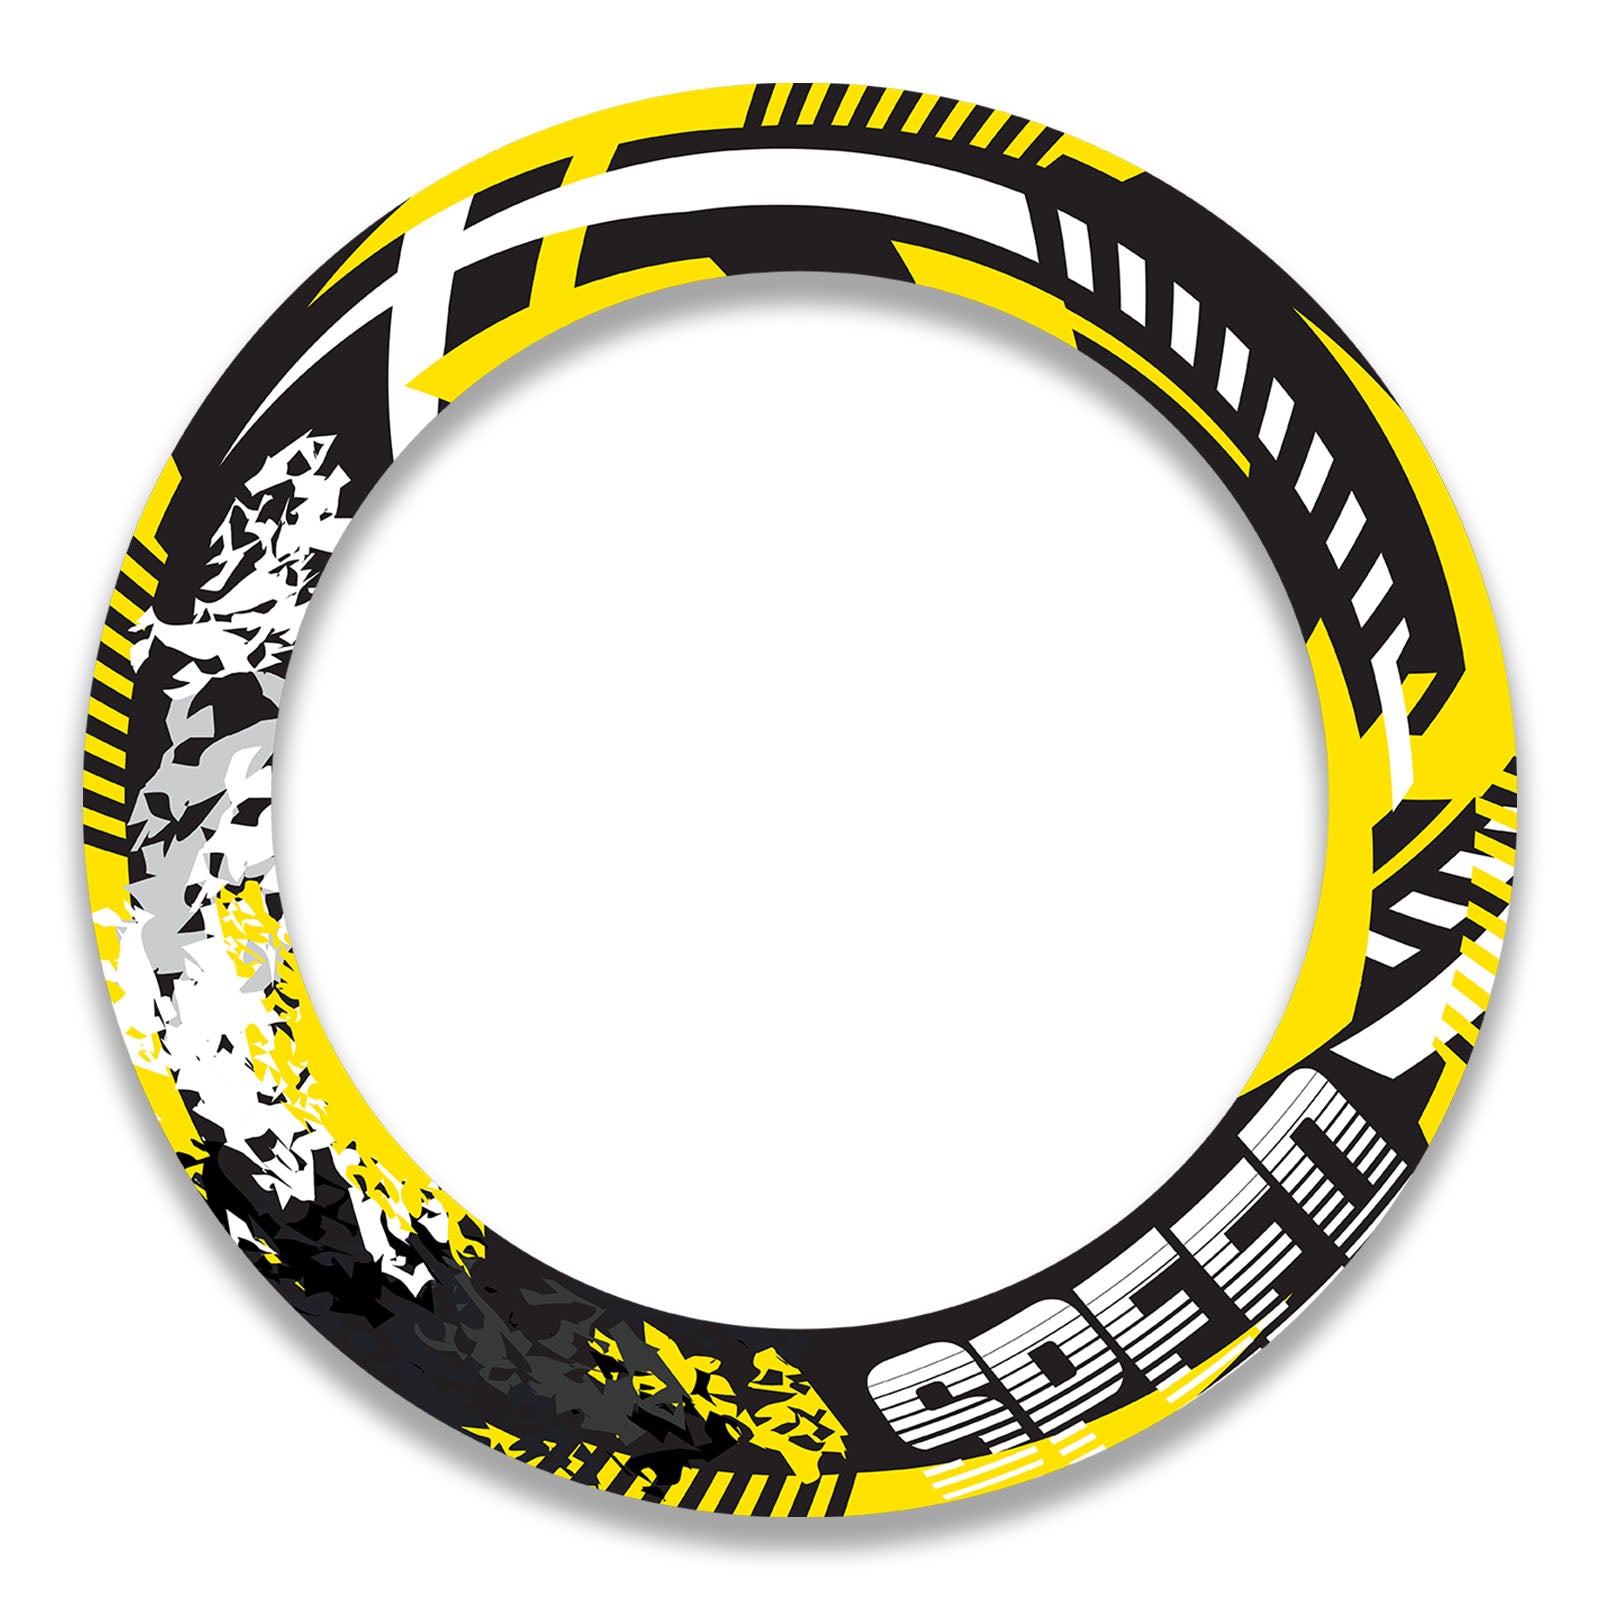 Fits 17'' Rim Protection Wheel Sticker T08W Whole Rim Decal